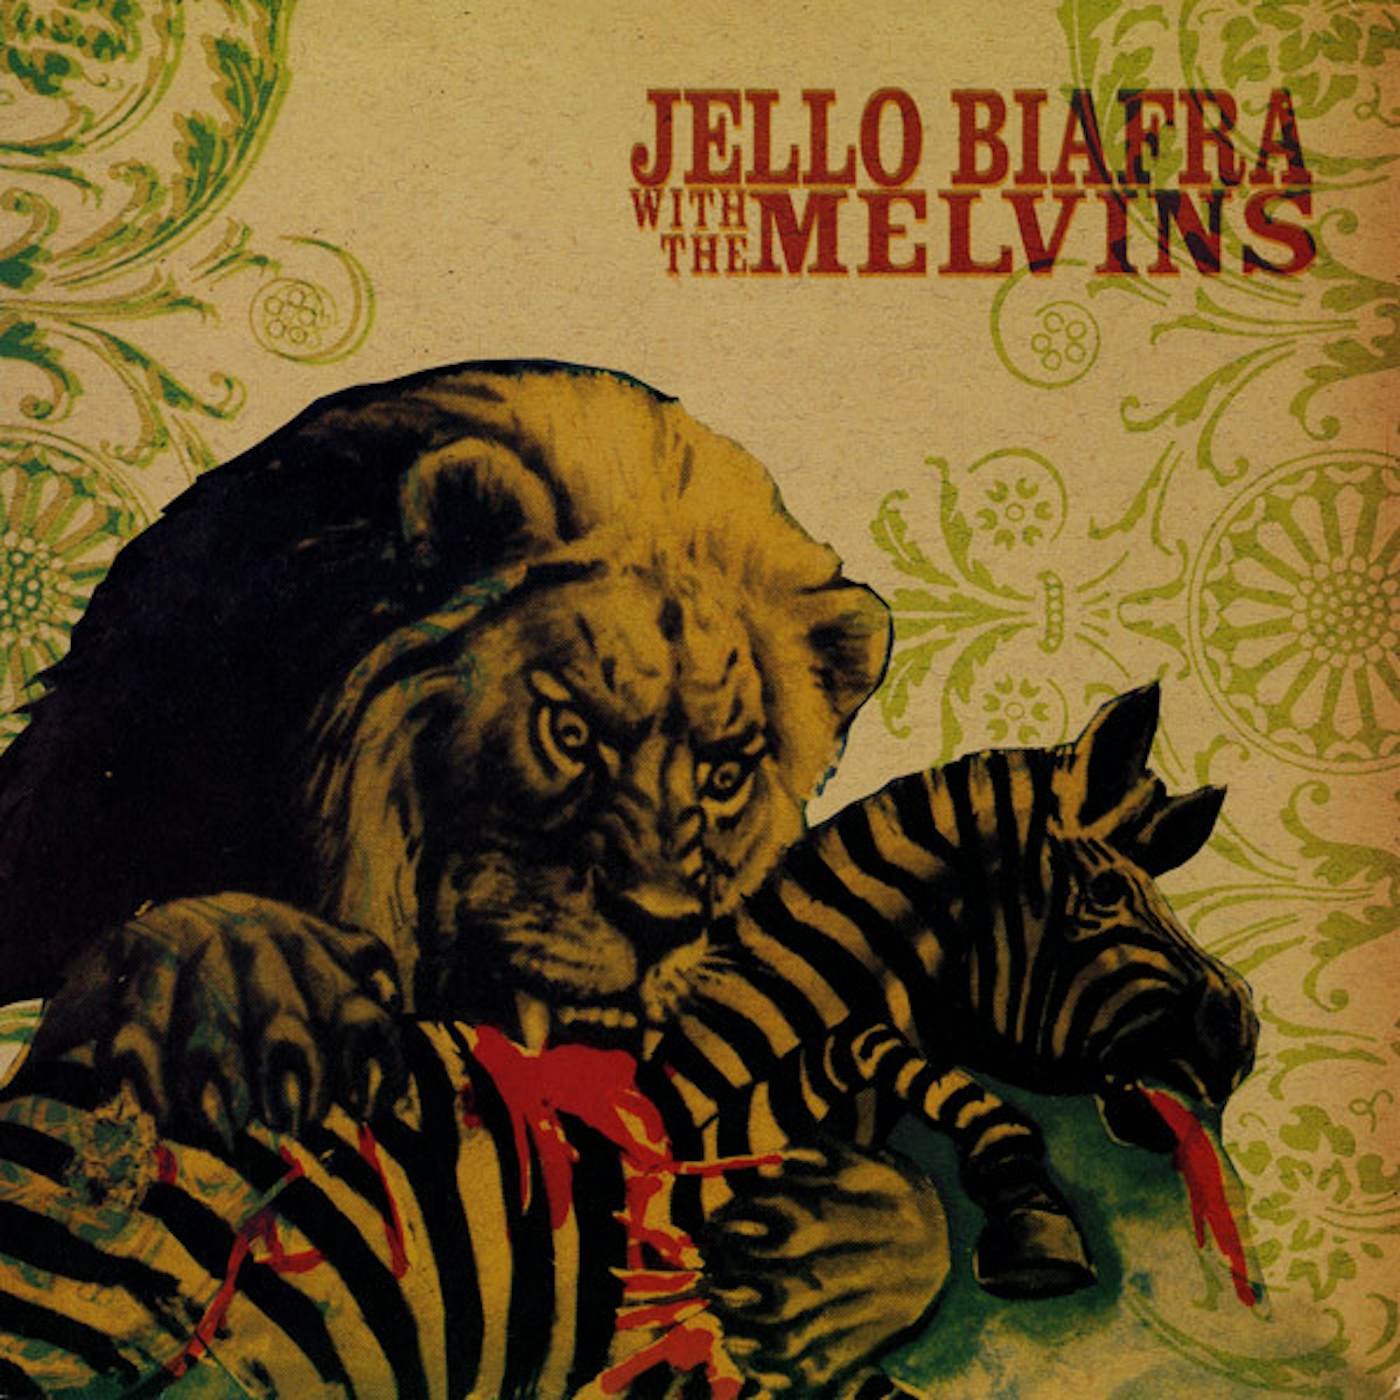 Jello Biafra & The Melvins Never Breathe What You Can't See Vinyl Record